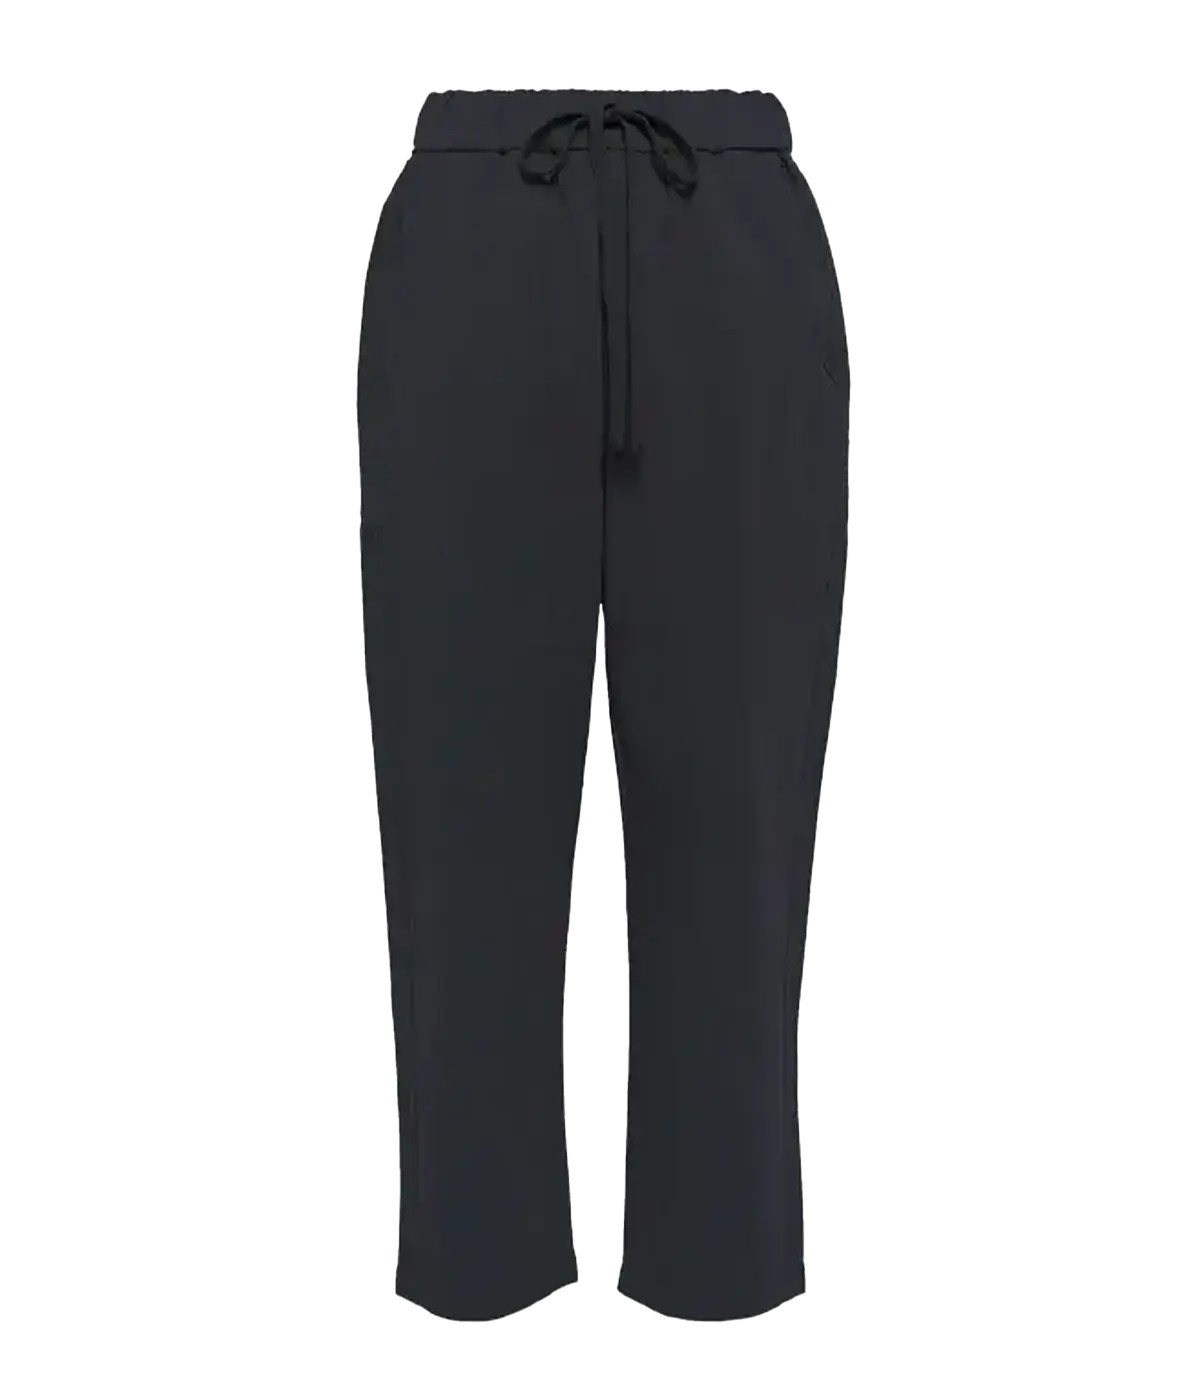 Pony Pull on Pant in Black